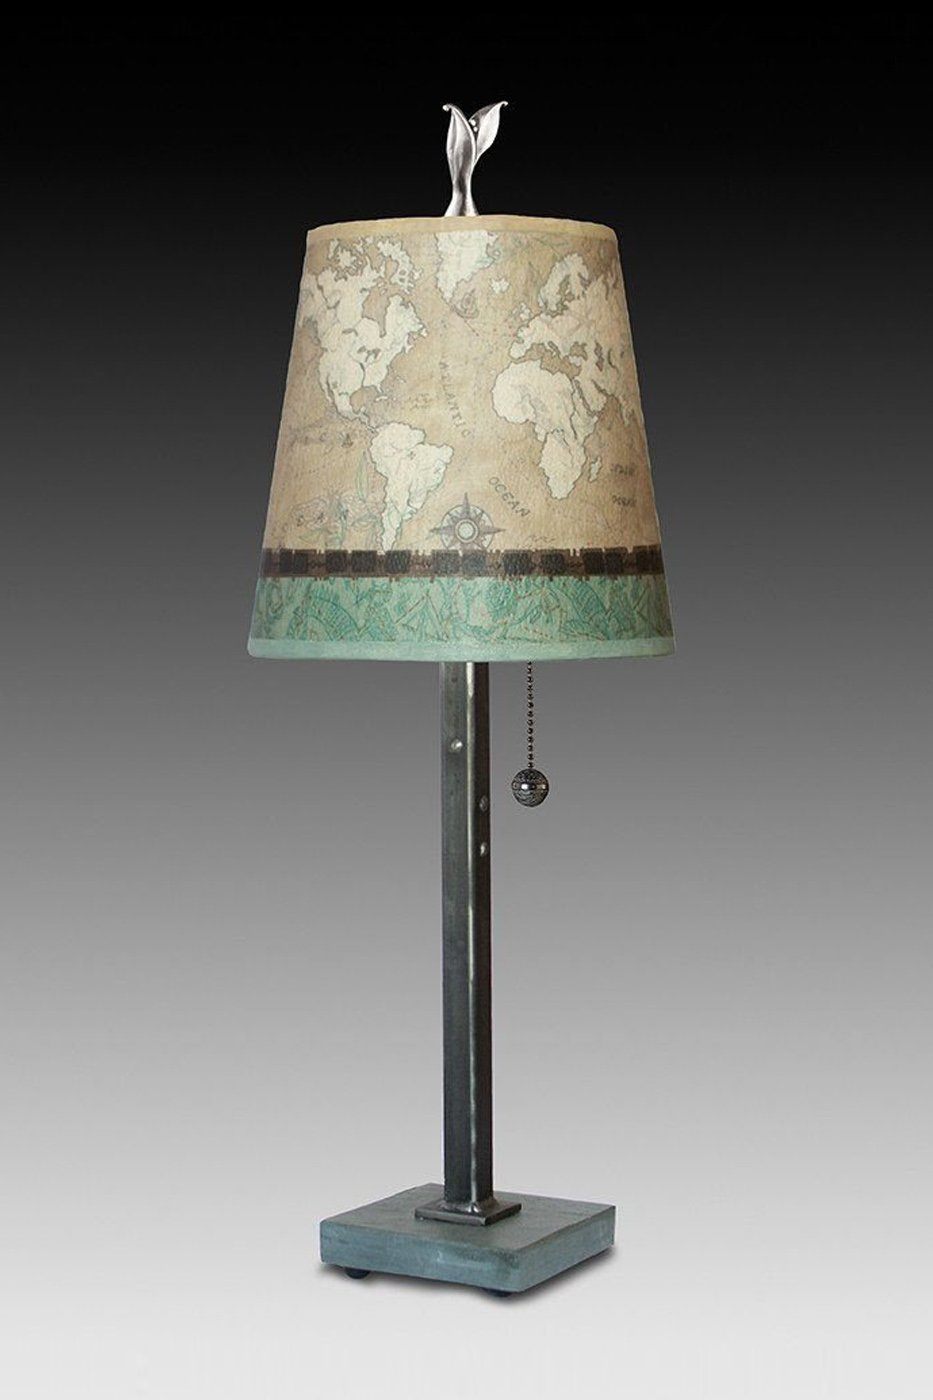 Janna Ugone &amp; Co Table Lamps Steel Table Lamp with Small Drum Shade in Voyages